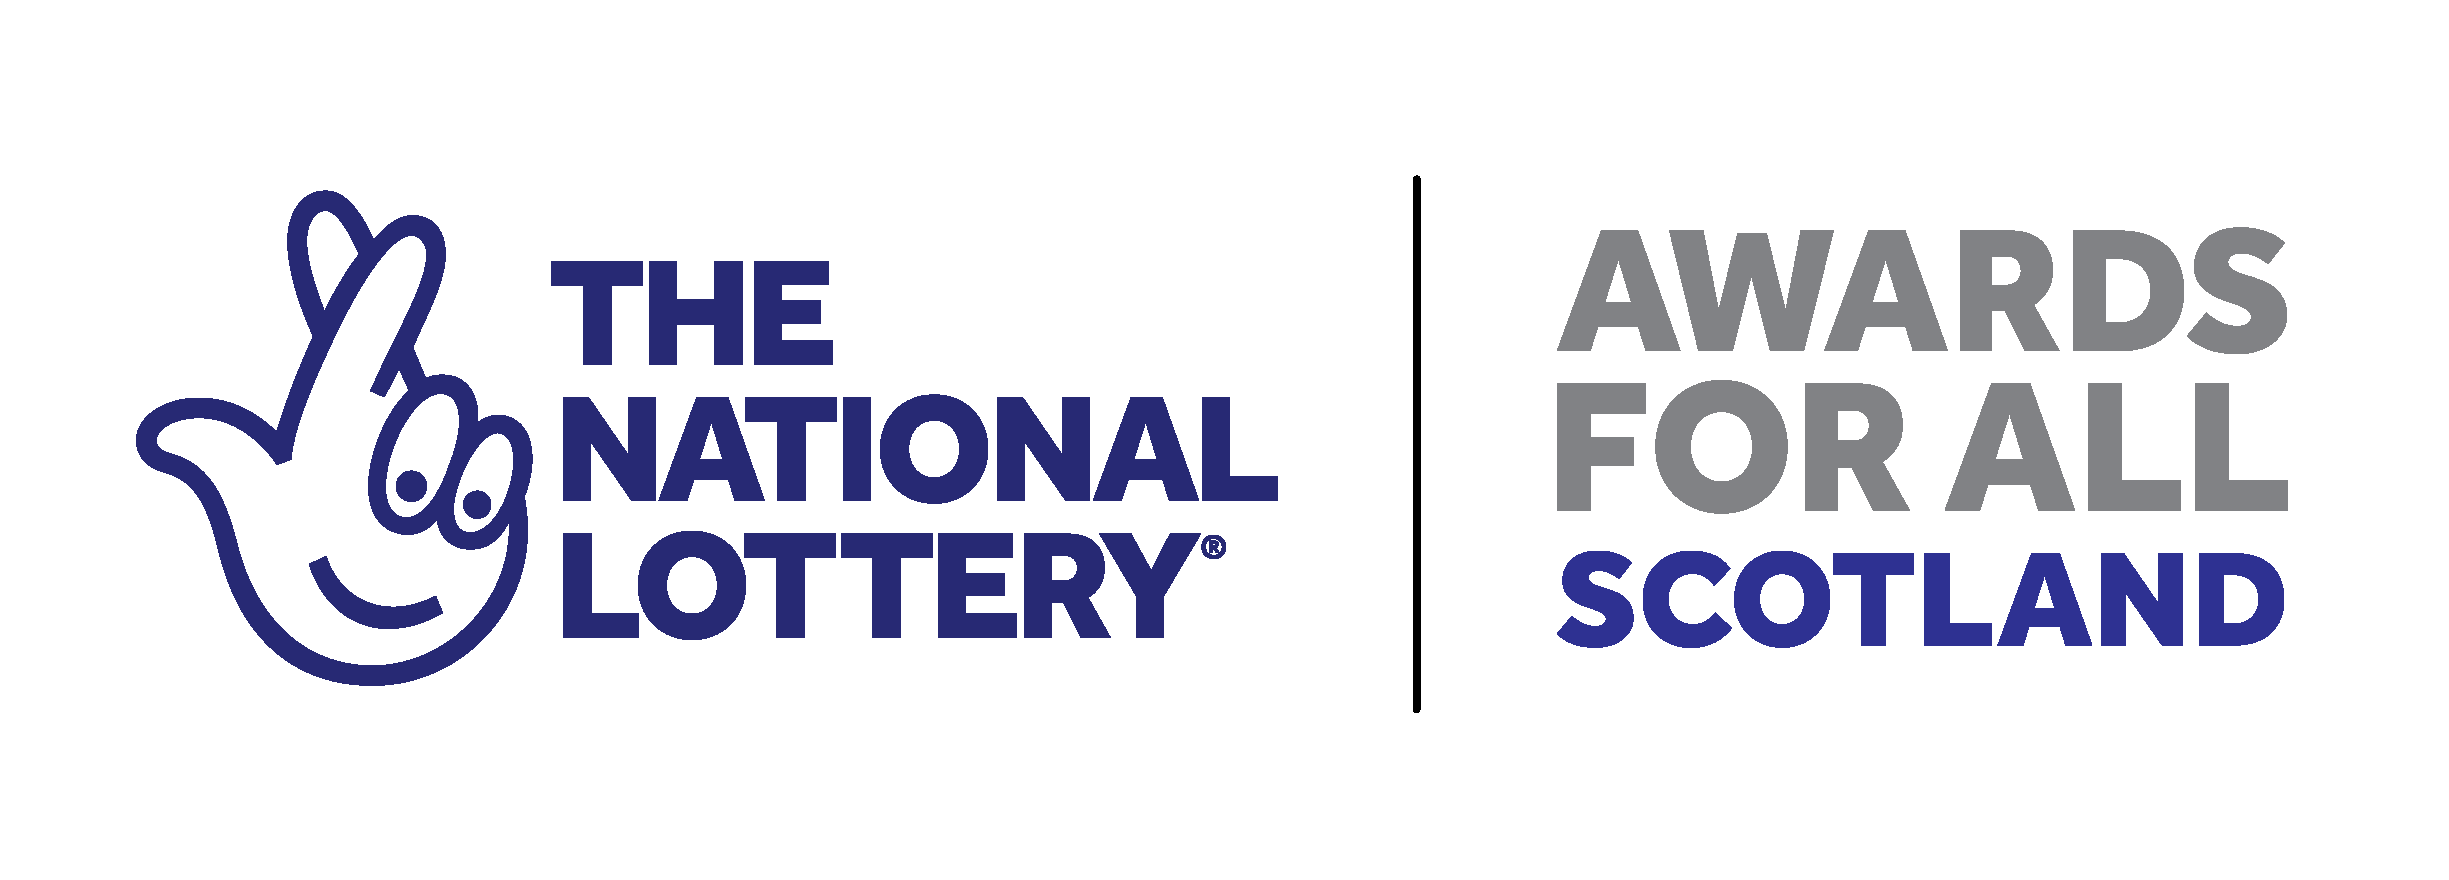 National Lottery Awards for All 